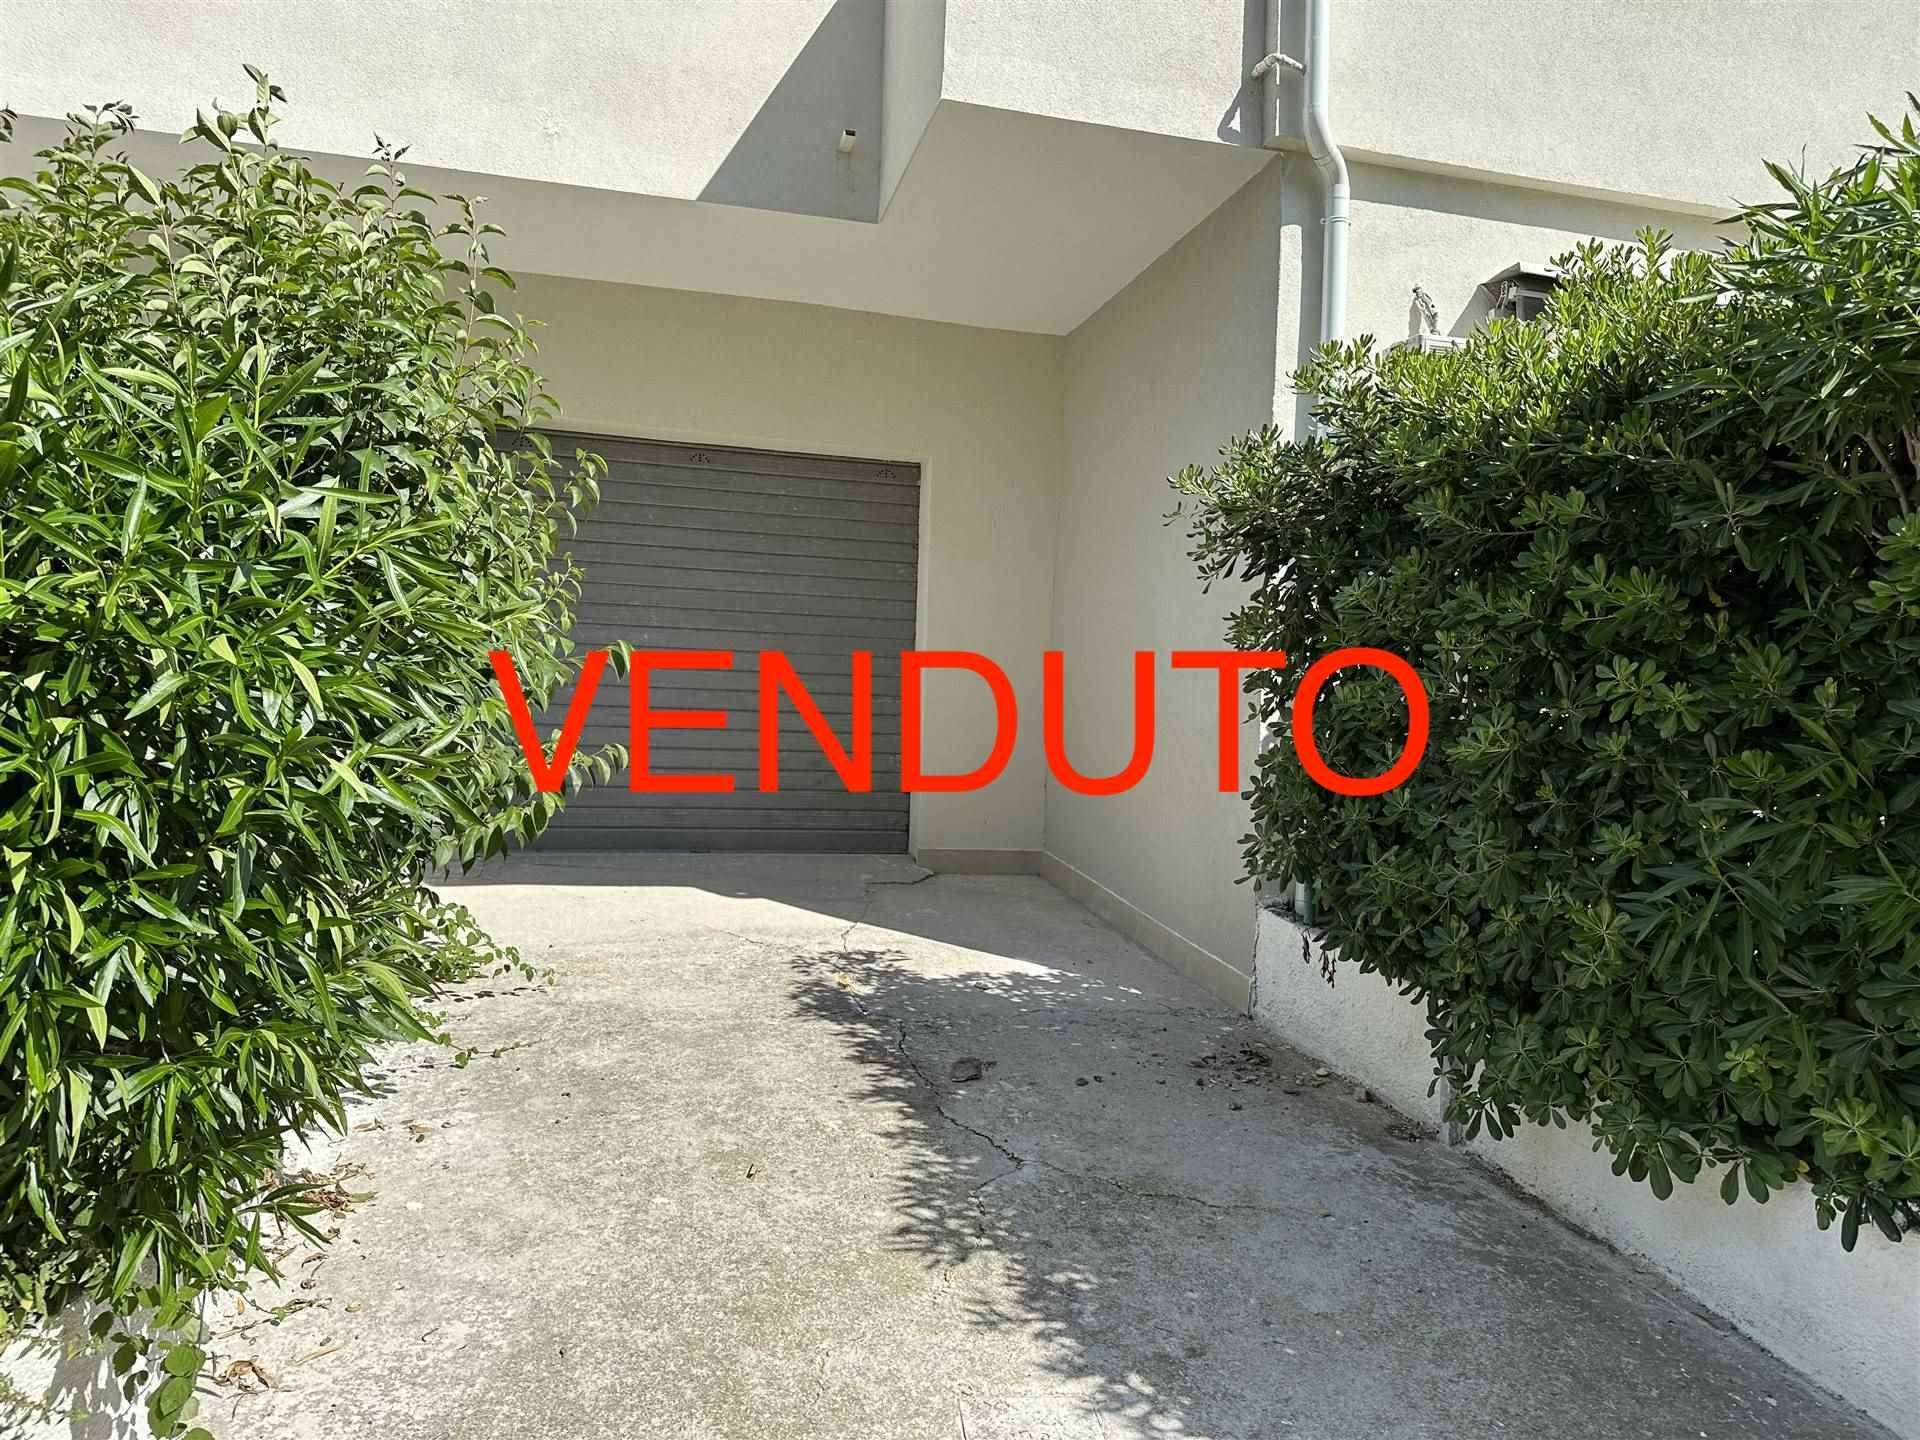 SAN SALVO MARINA, SAN SALVO, Garage / Parking space for sale of 10 Sq. mt., Energetic class: G, Epi: 1 kwh/m2 year, composed by: 1 Room, Double Box, 